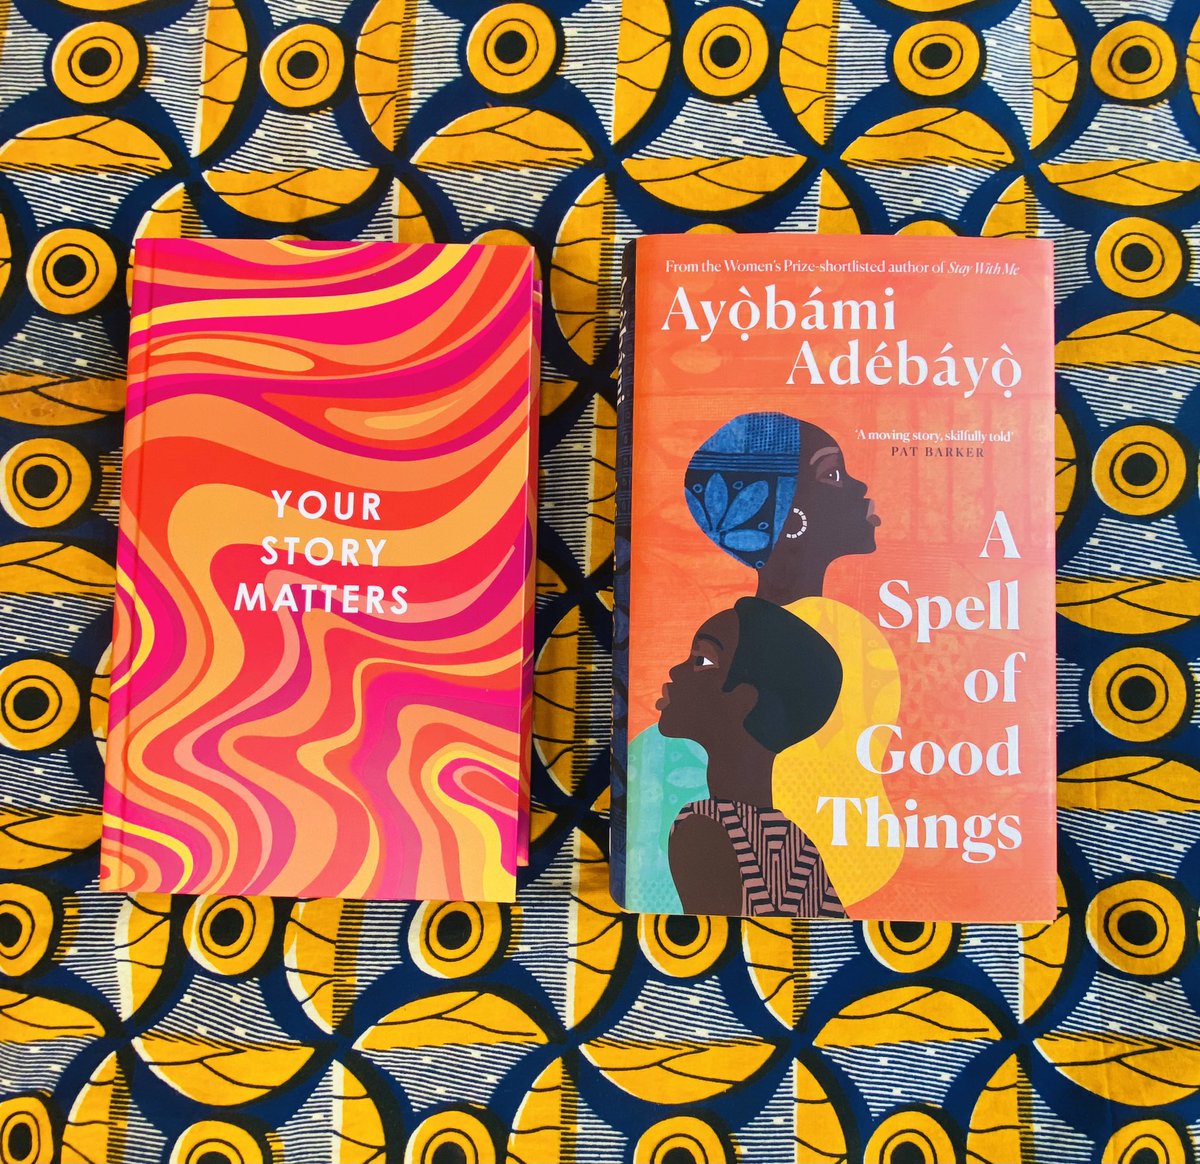 What I’m reading at moment 😍😍

📚 Your Story Matters by @nikeshshukla 

📚 A Spell of Good Things by Ayòbámi Adébáyò